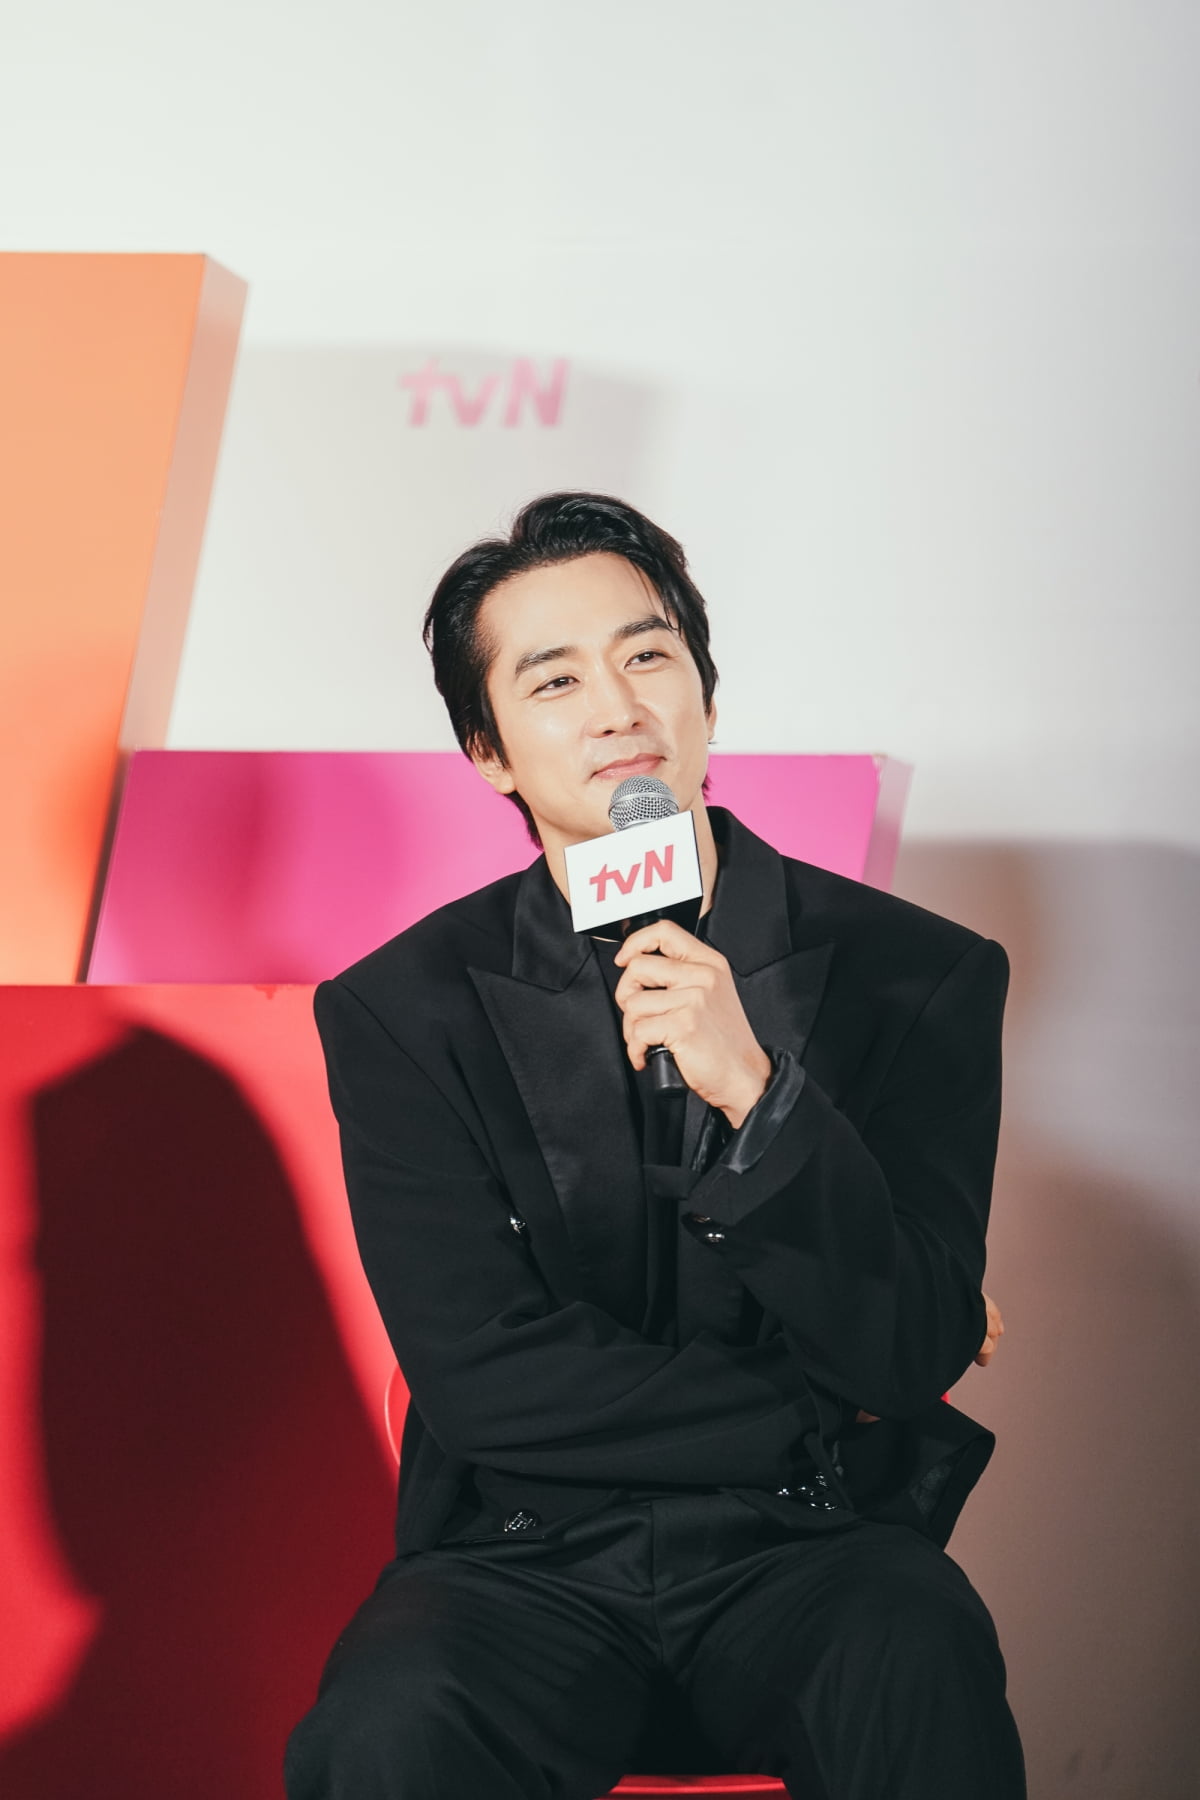 Song Seung-heon thanks for comparing him to Tom Cruise